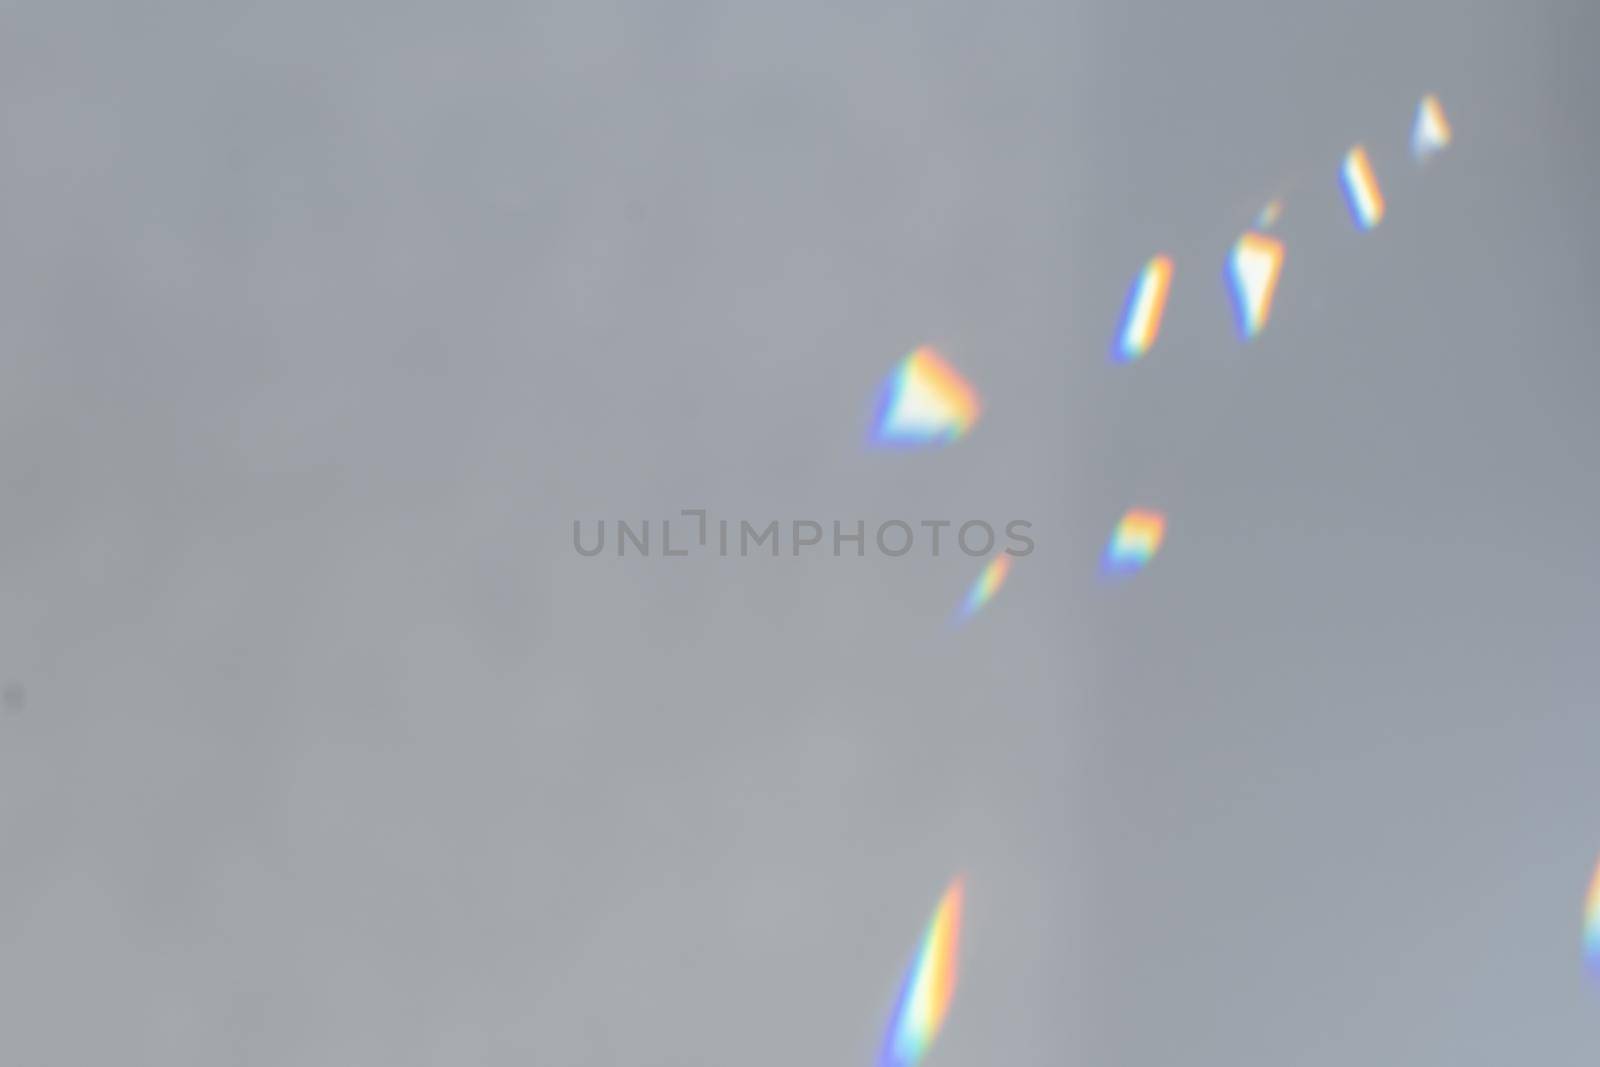 .Crystal light reflections for overlay mockup on light background. Rainbow holographic shadow mock up, iridescent prismatic wallpaper. Abstract prism reflection, rays leaking through lens. by photolime